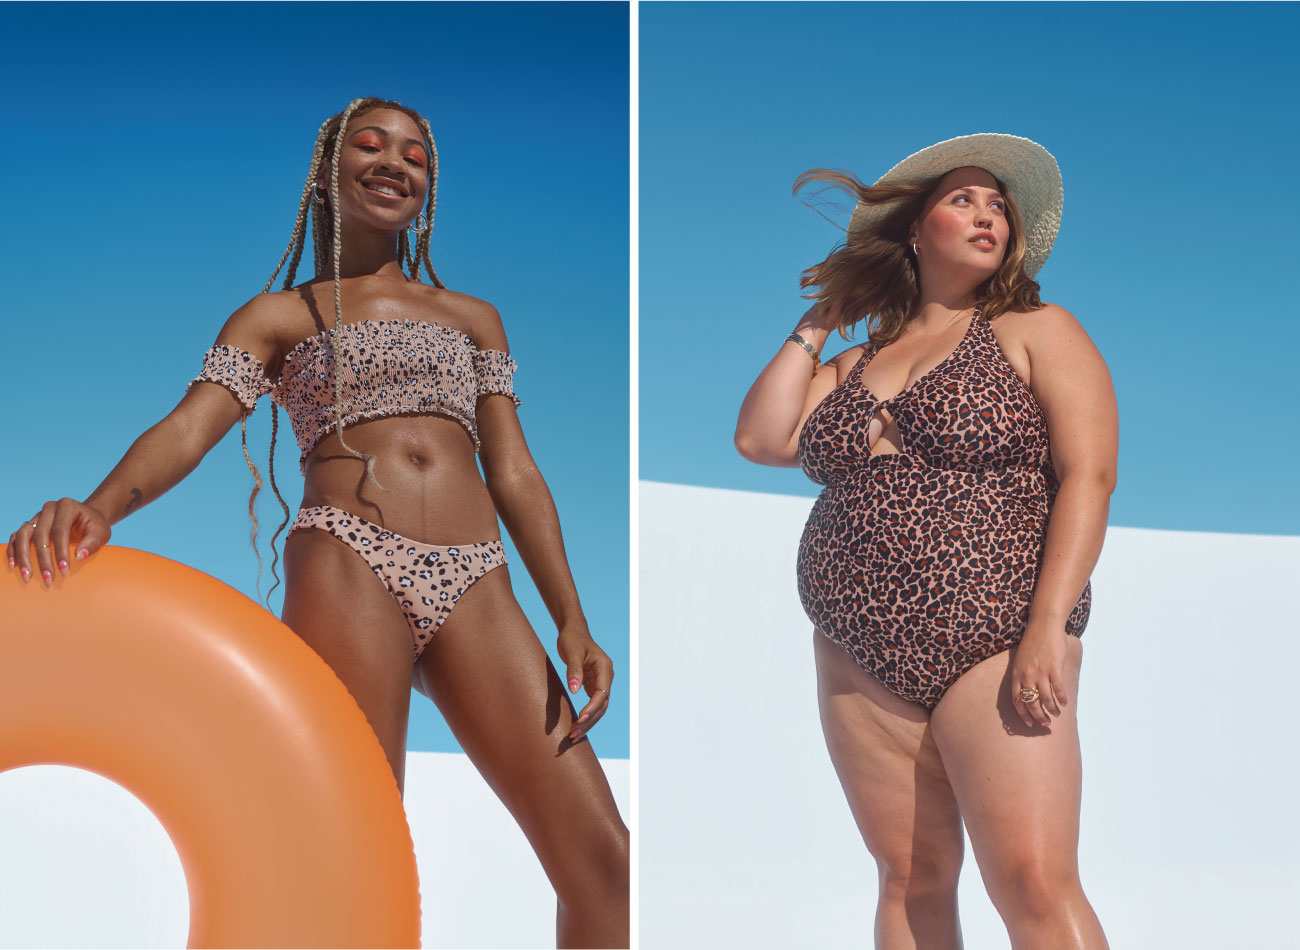 Two women wear animal print swim suits, one an off-the-shoulder bikini and one a one-piece with cut-outs